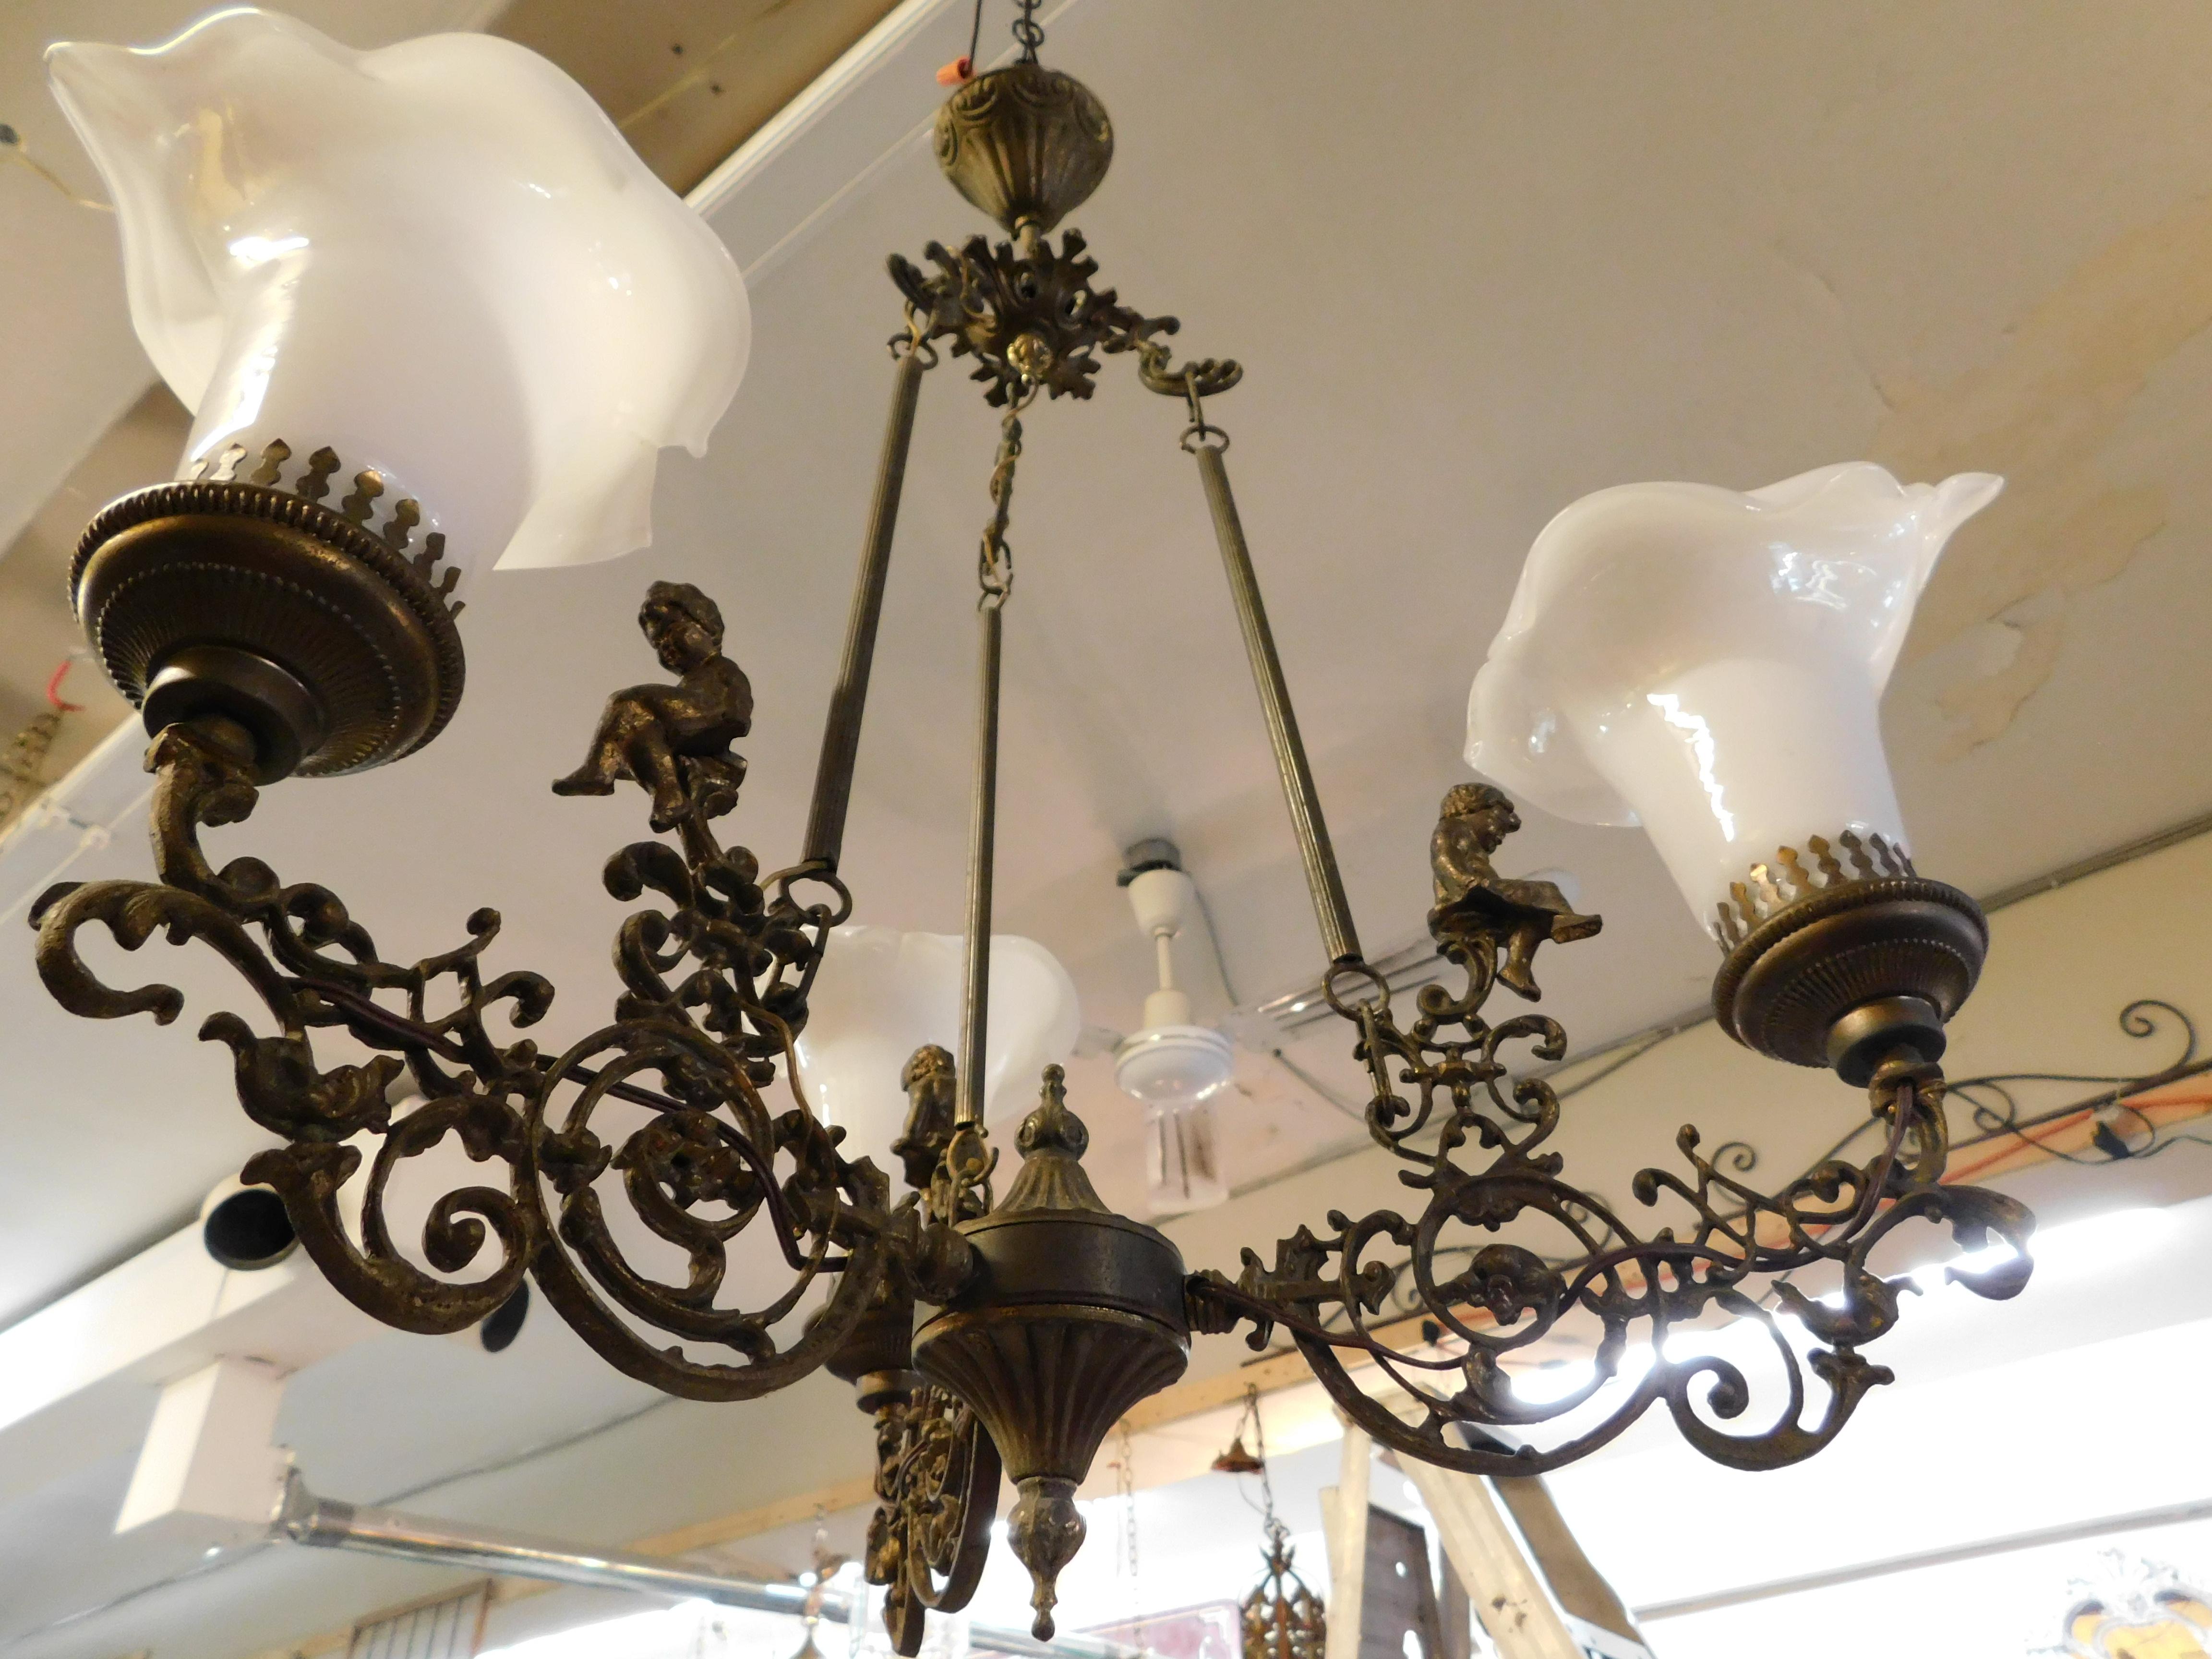 Early 20th century French bronze figural chandelier with 3 cherubs or Putto. Three hand blown milk glass shades have been replaced with newer versions. Bulbs are European thread, 3 bulbs included.

The more commonly found form putti is the plural